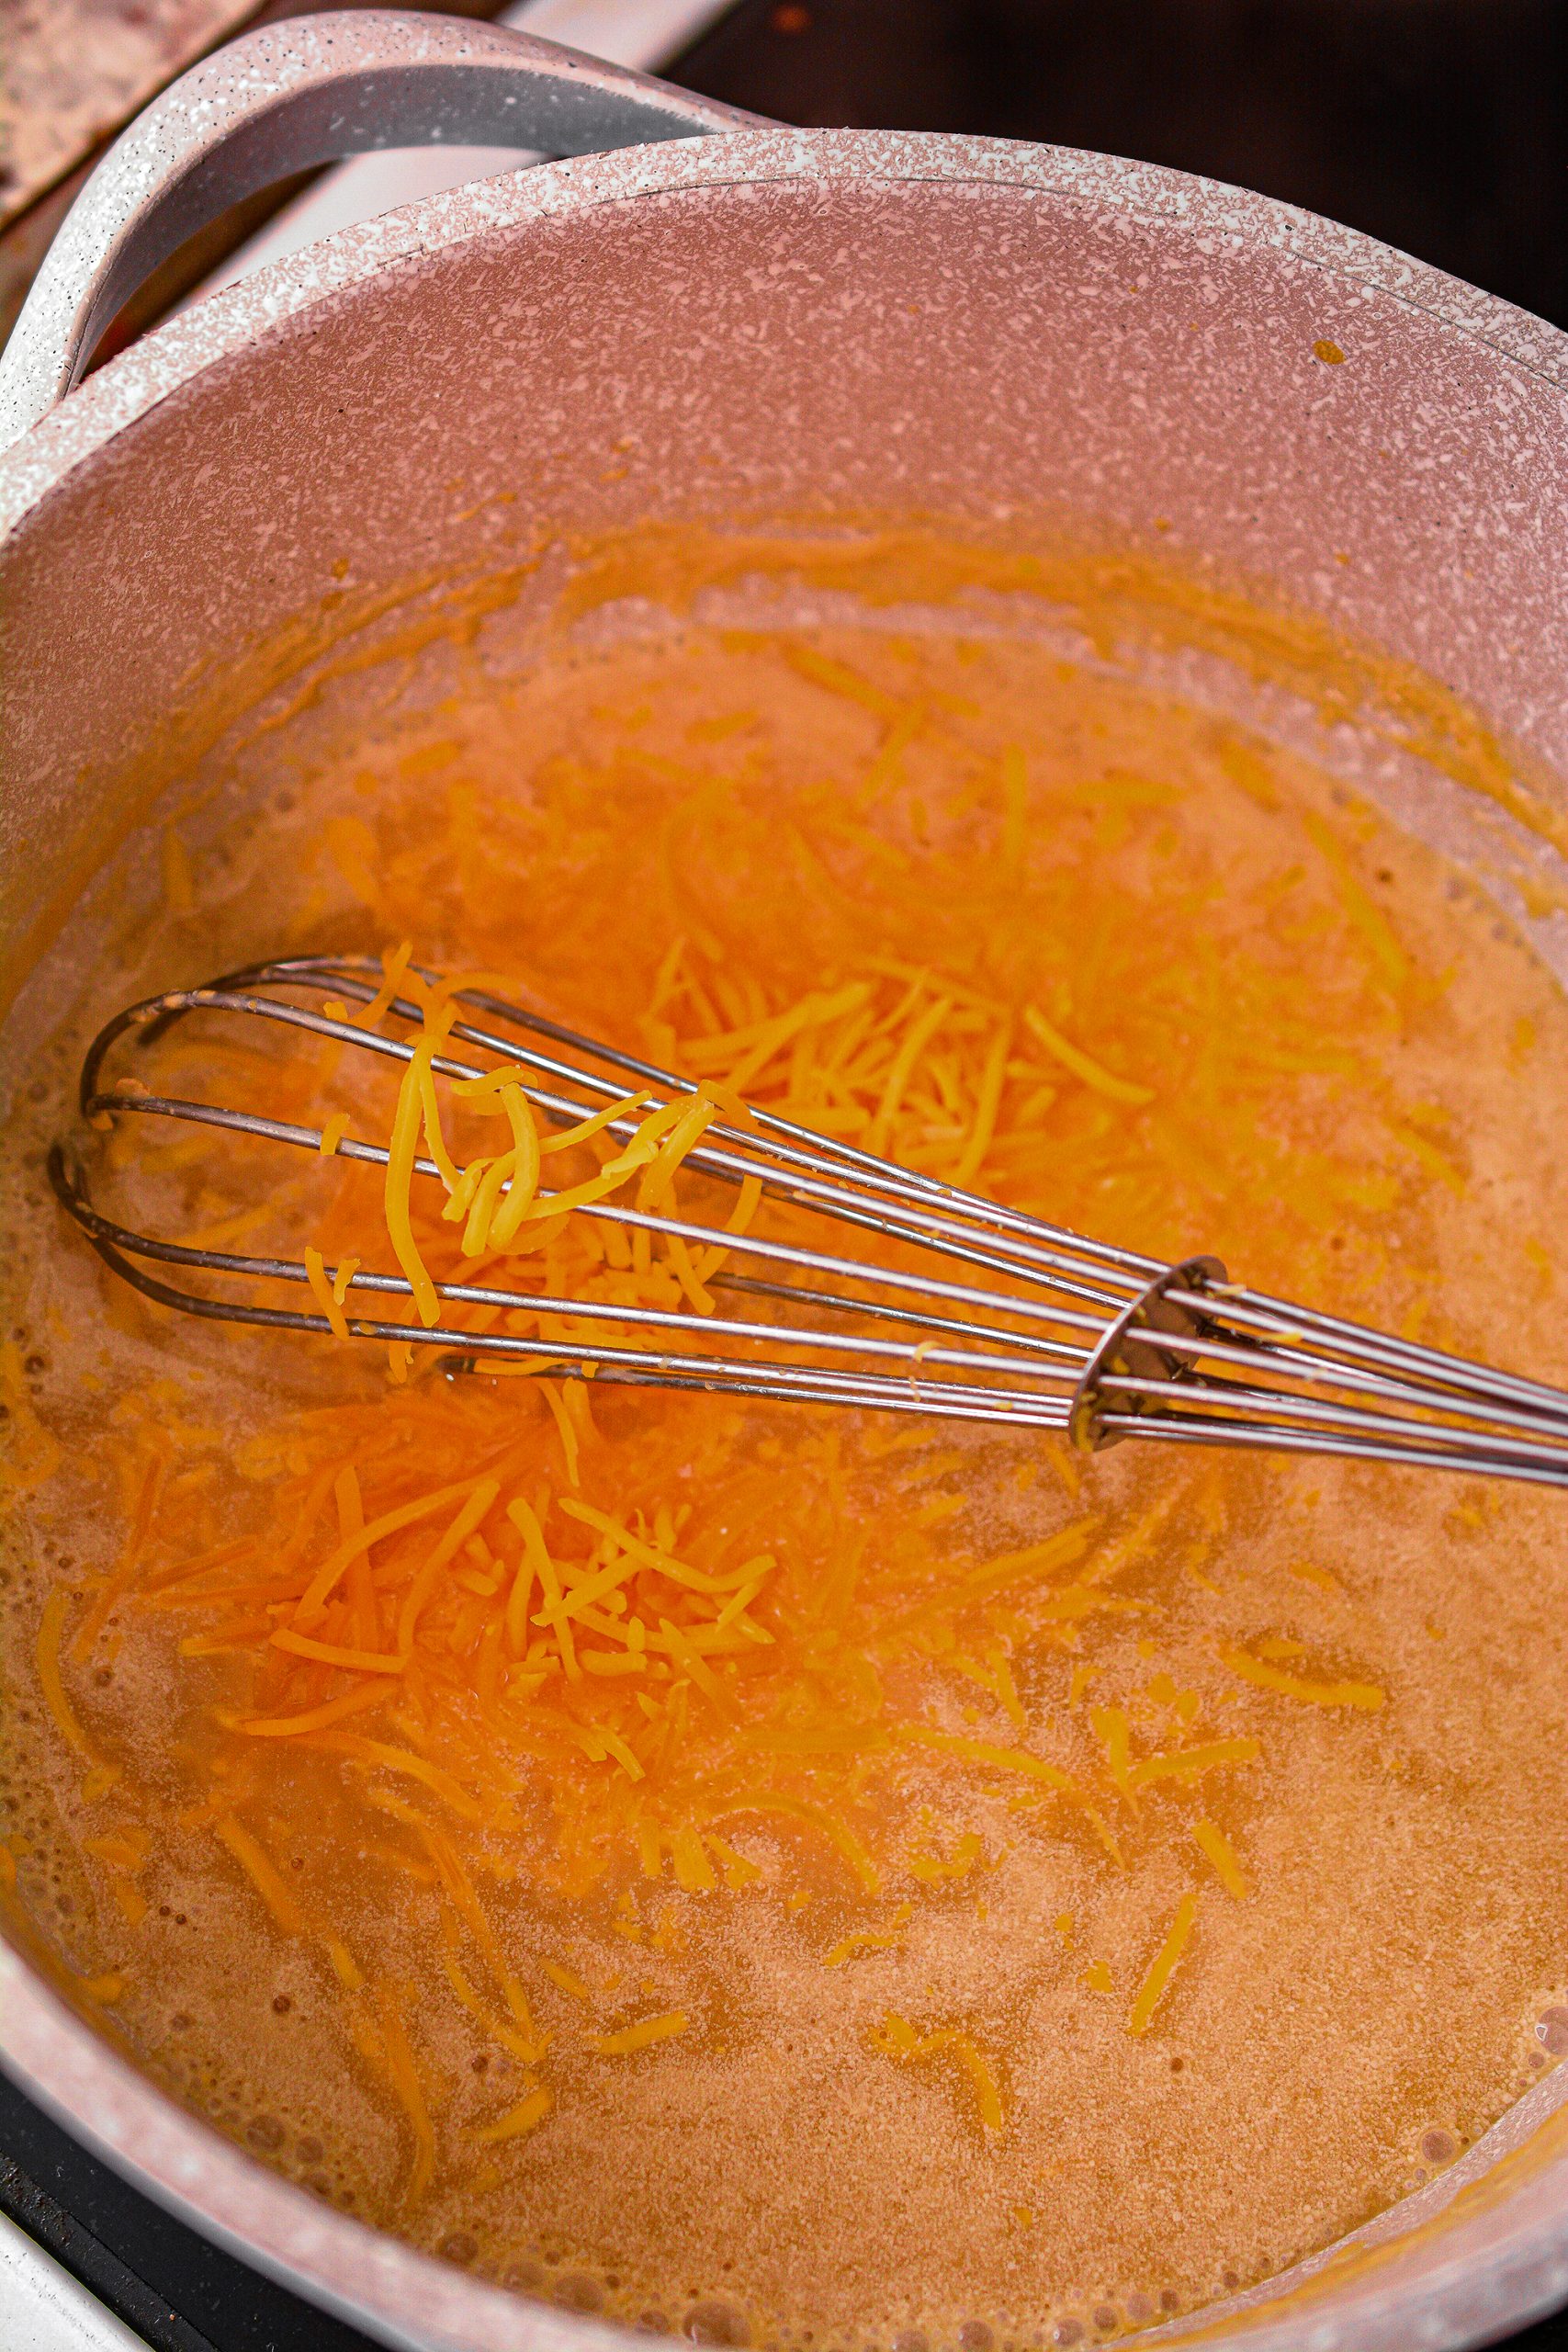 Stir the remaining cheese into the sauce.